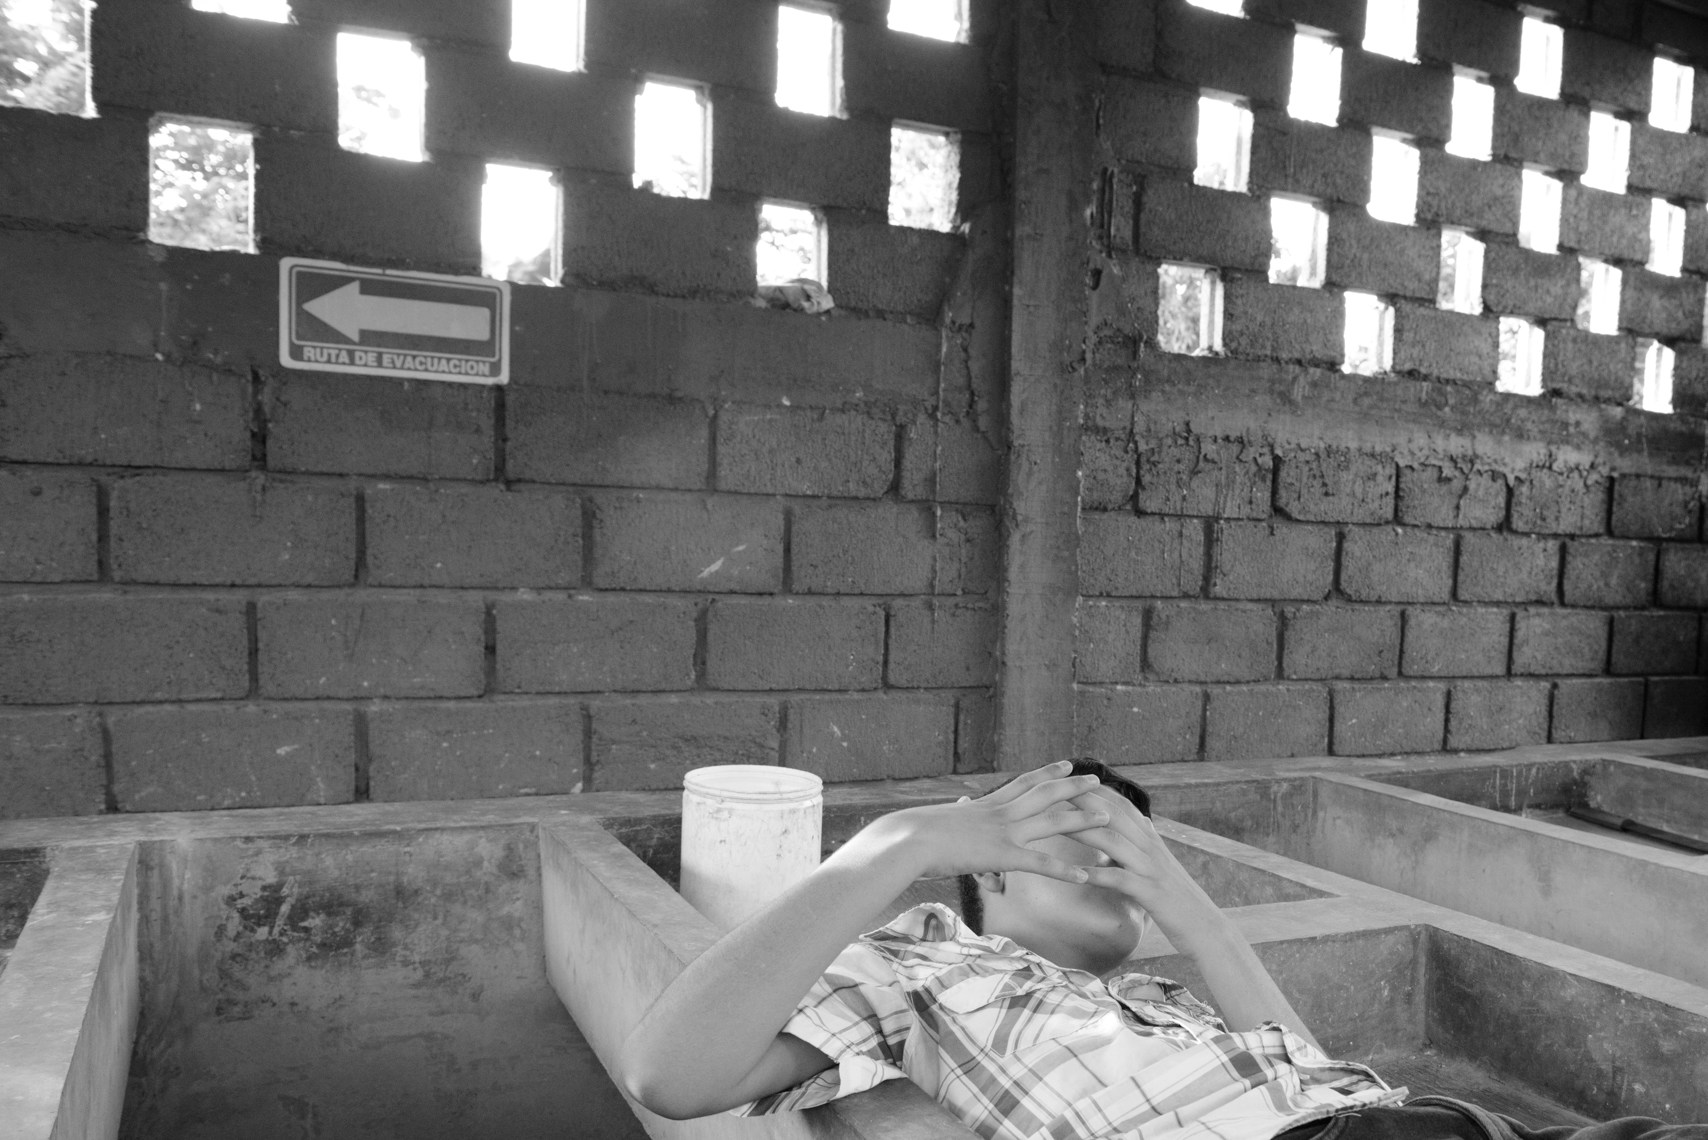 A 13-year-old Honduran boy reclines in a sink for washing clothes at a refuge for families seeking asylum in Tapachula, Chiapas. Gang members killed his father, a police officer, six years ago. They demanded his mother hand over half of the money she earned selling food on the street, then later insisted the boy join the gang or his 15-year-old sister become their girlfriend, so the family fled.They now live in a shelter for asylum-seekers as their application for refugee status is processed. They're grateful for the refuge, but the donated food is often scarce and they are allowed to leave just once a day and must be back by 6:00PM. They are terrified that gang members will spot them, as the city is full of migrants from Honduras.